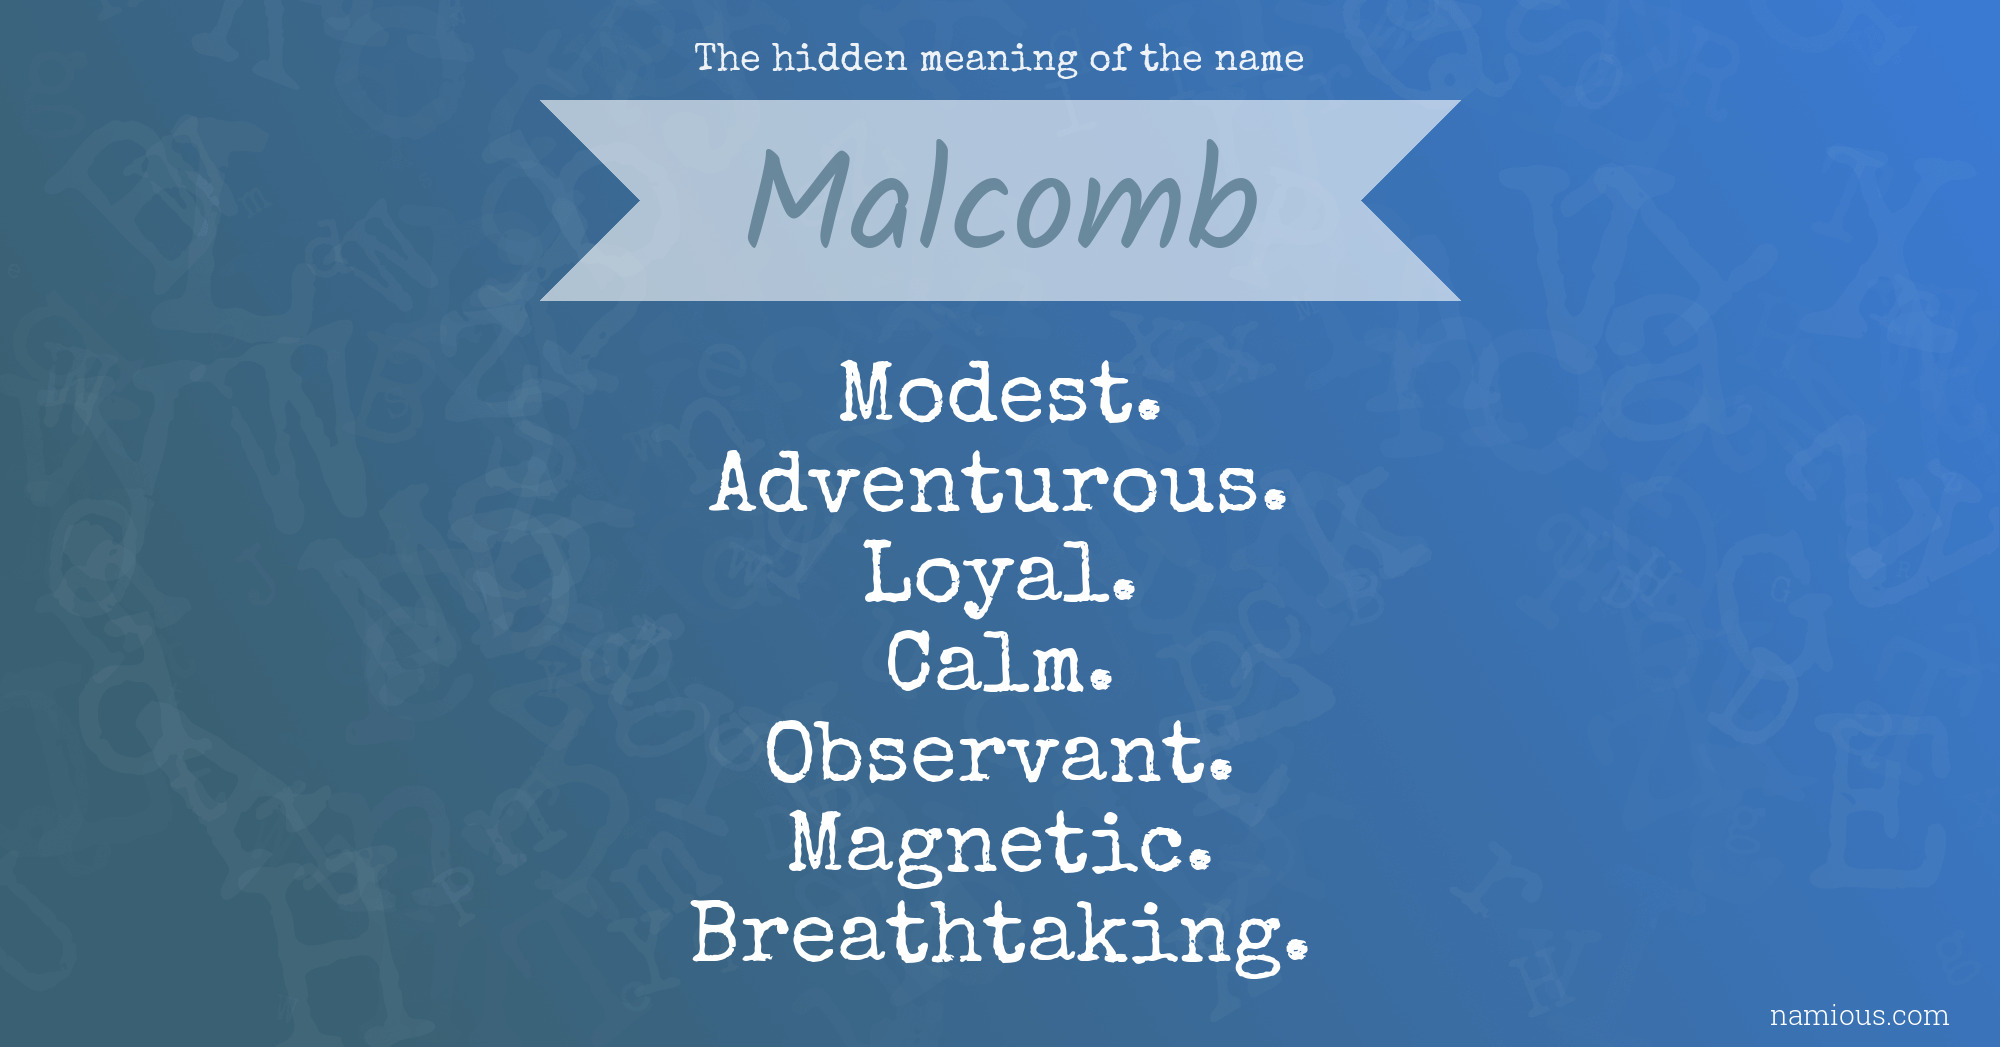 The hidden meaning of the name Malcomb